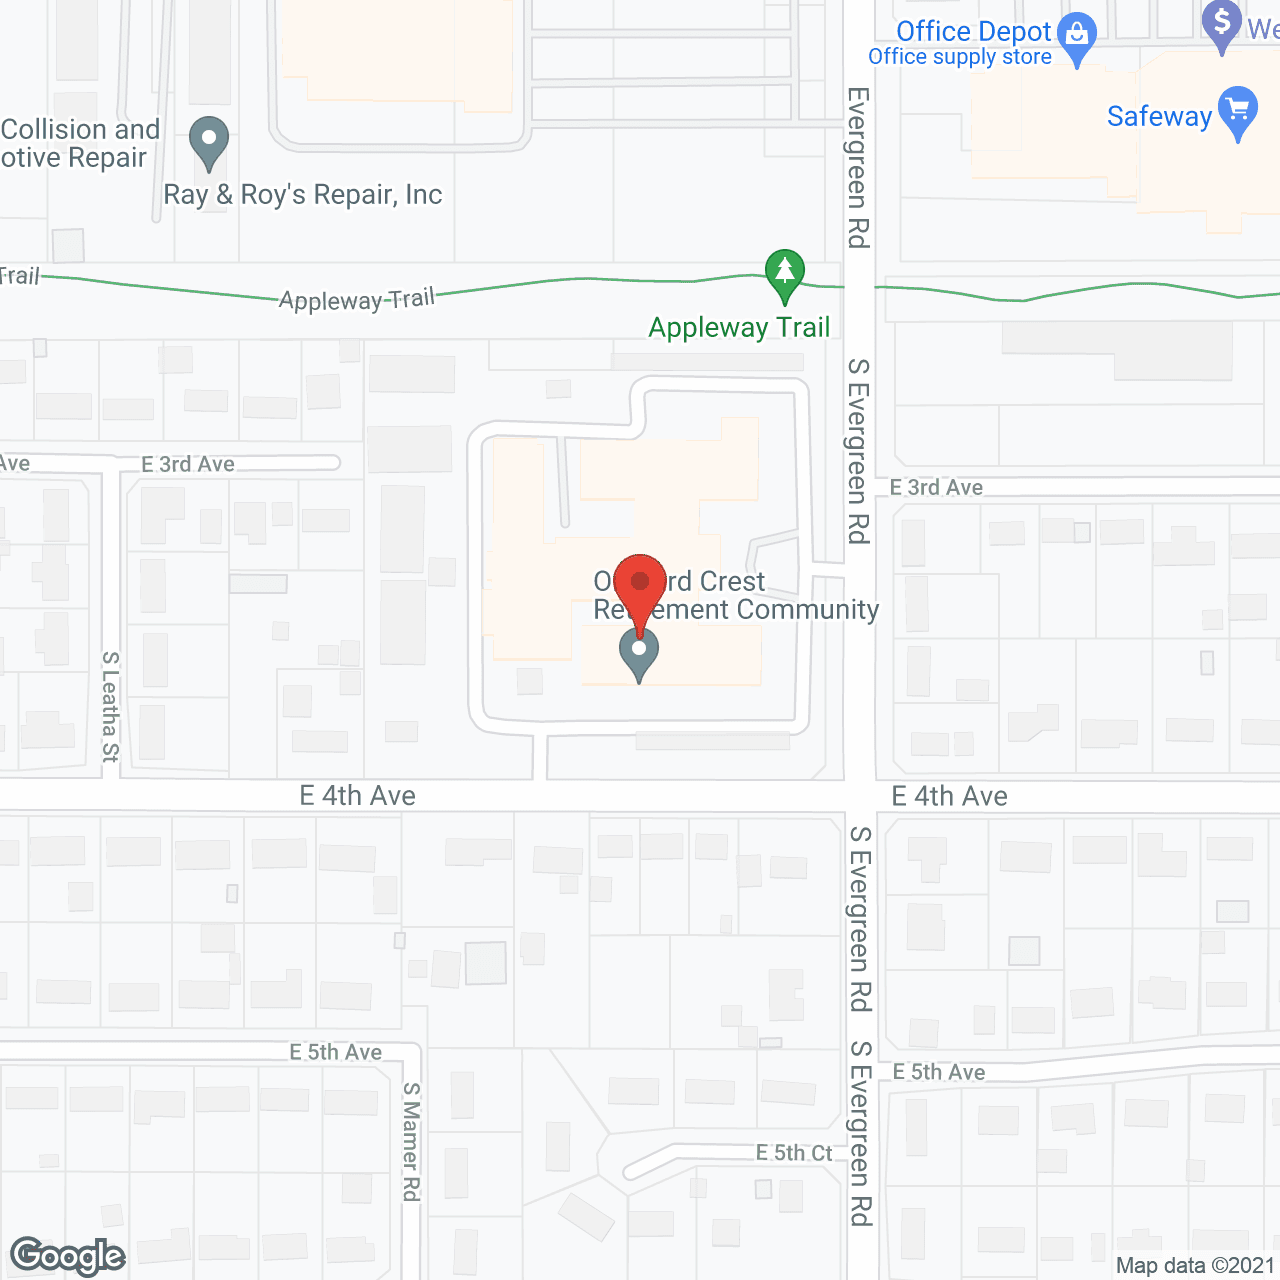 Orchard Crest Retirement Community in google map